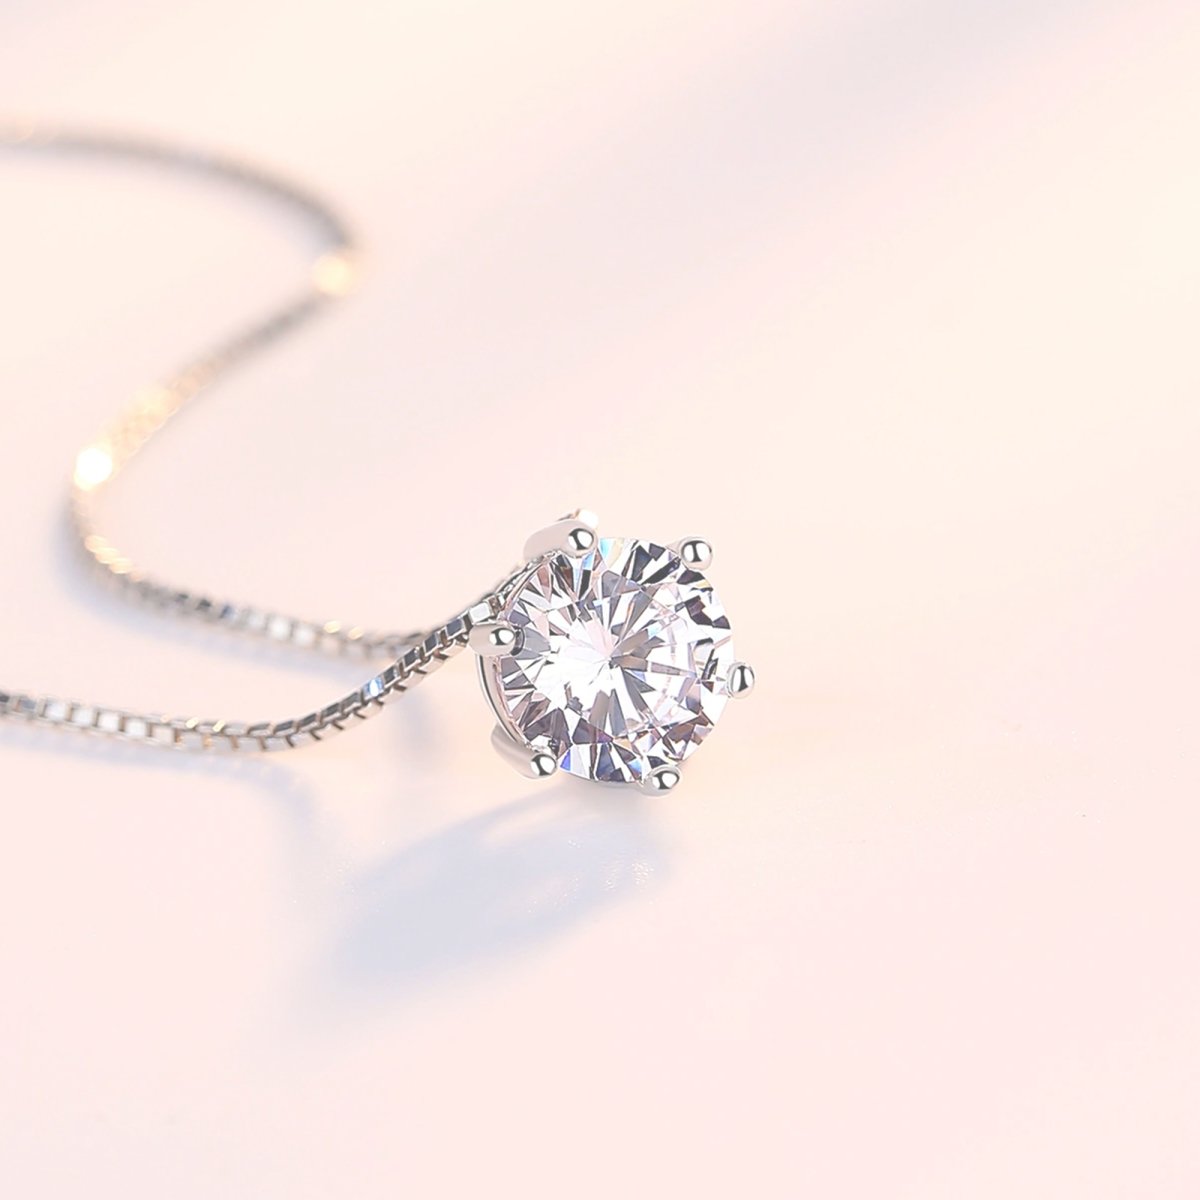 Niece Gift - Dainty CZ Sterling Silver Necklace - Meaningful Cards